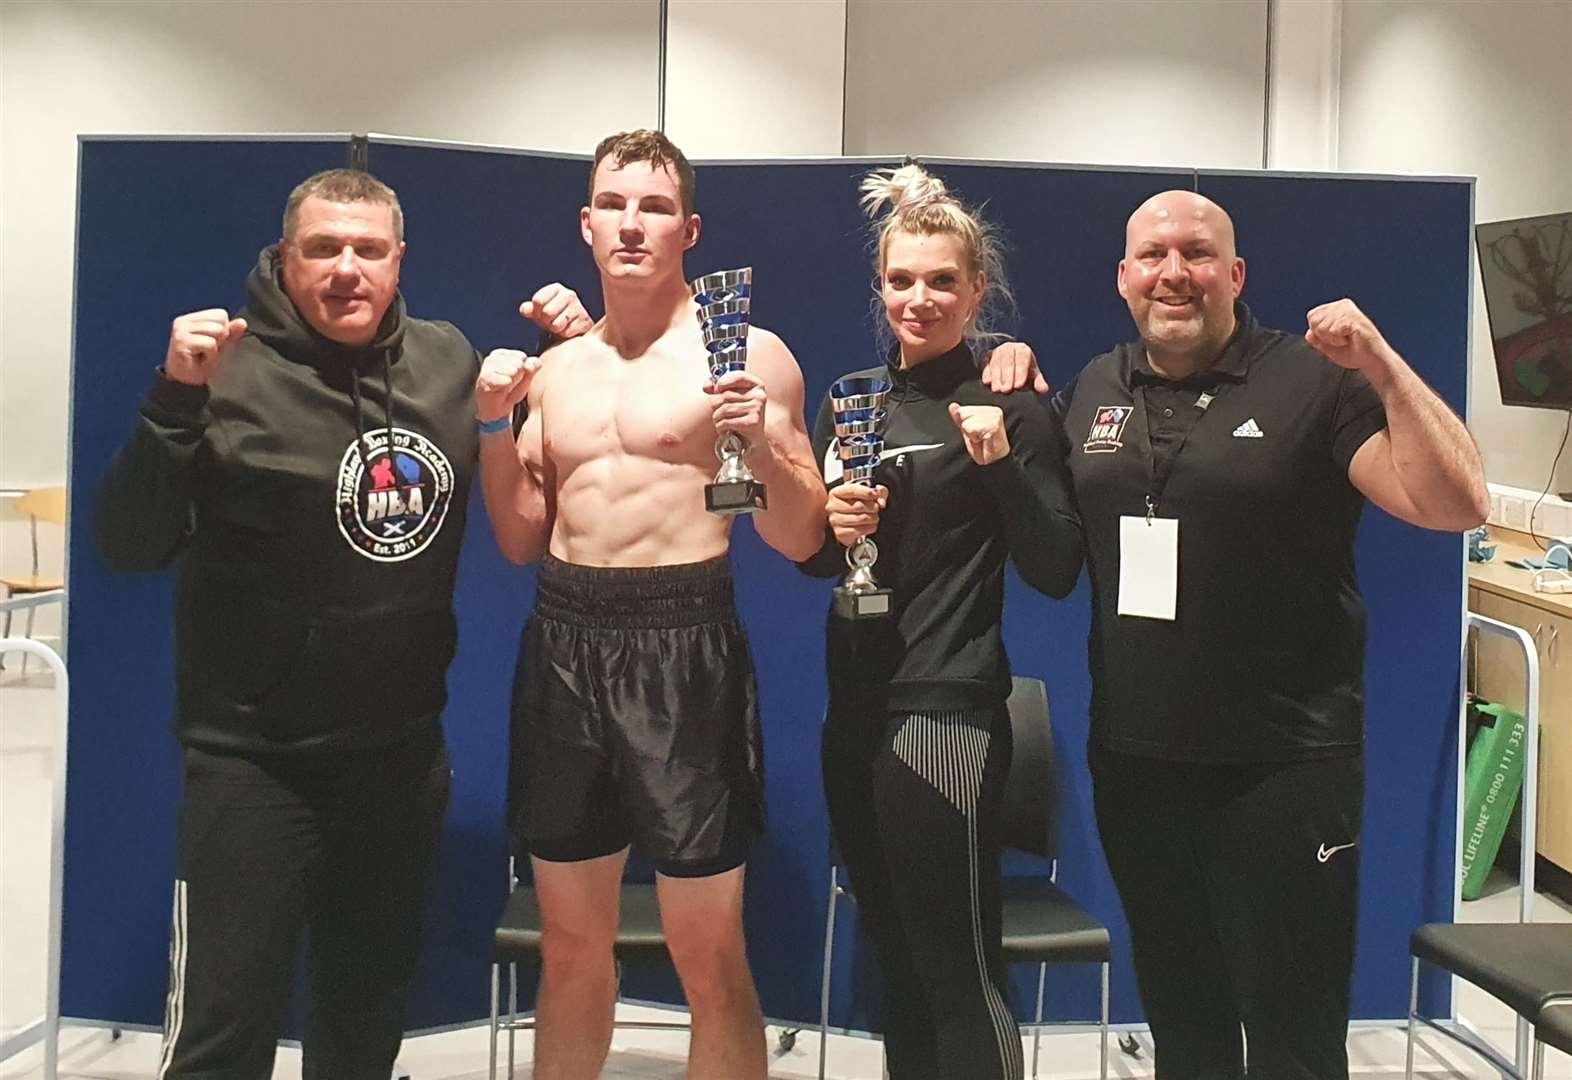 Steven Munro and Emma Miller each picked up victories by decision as Highland Boxing Academy made their return to the domestic scene.